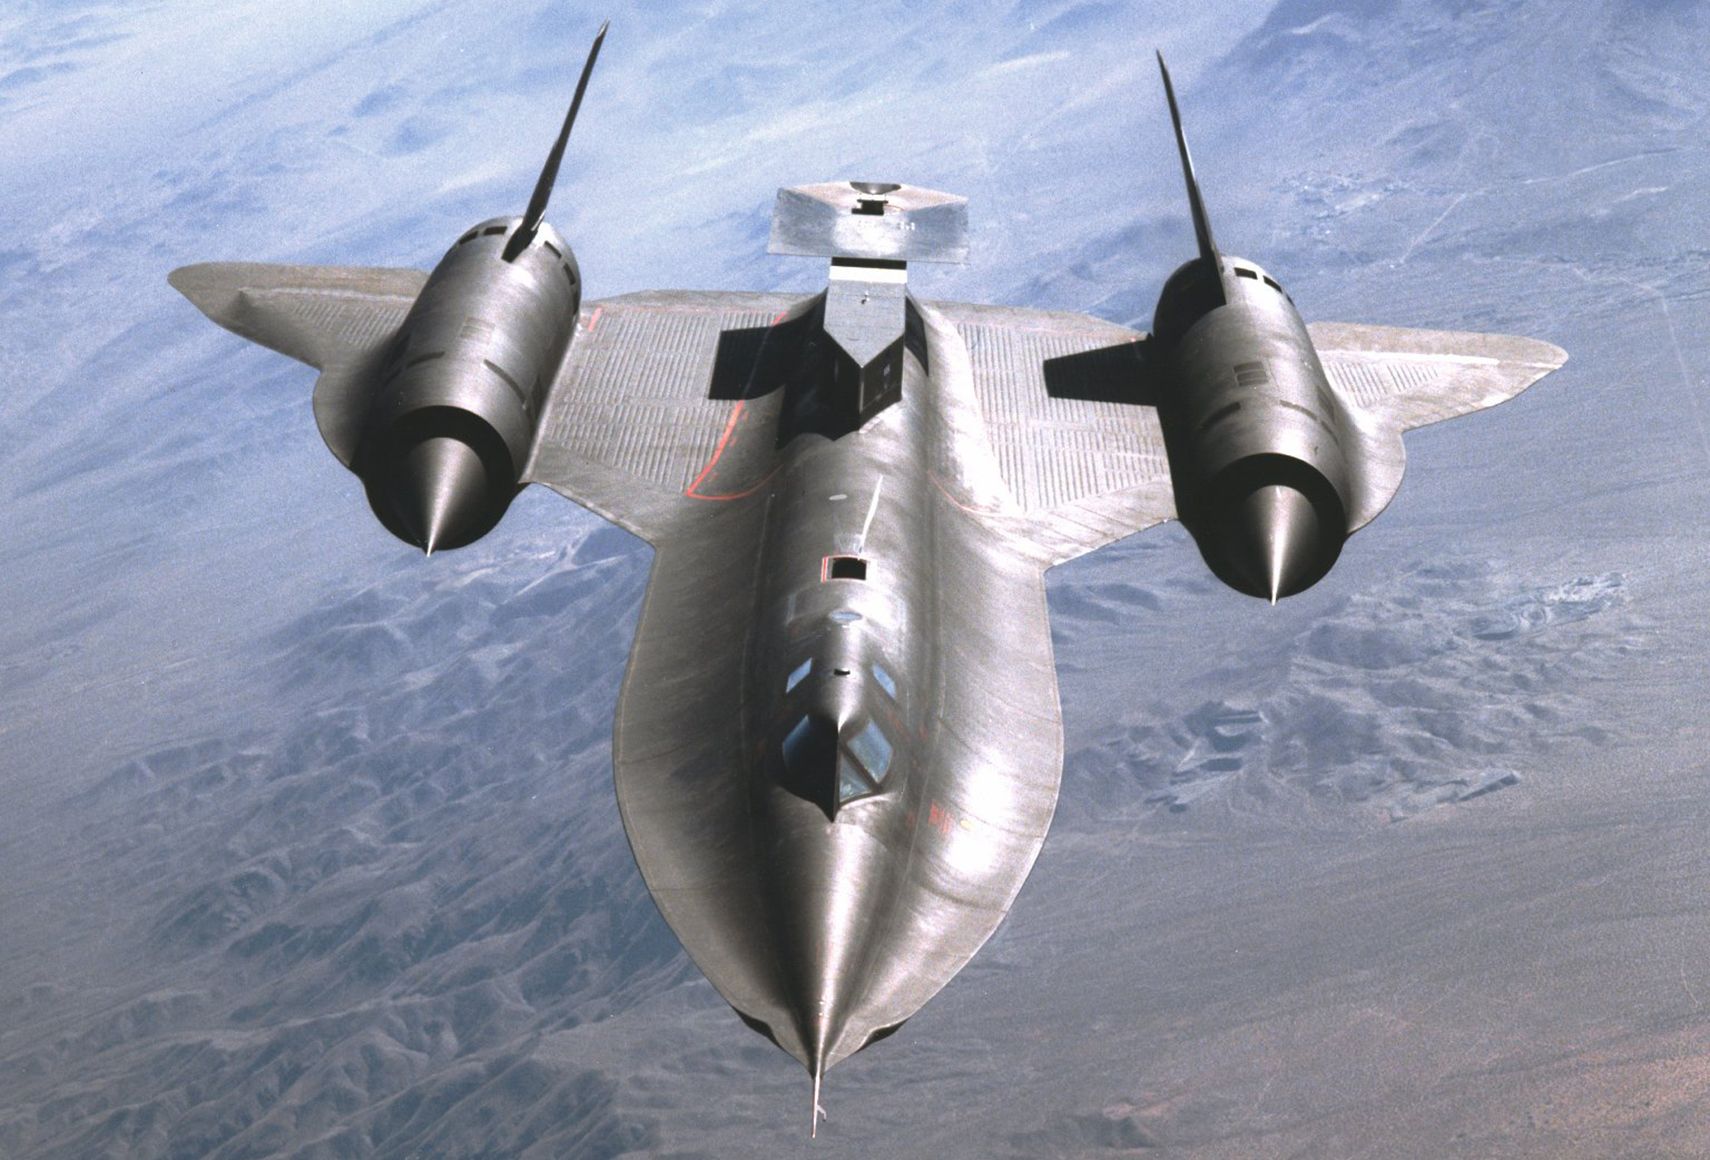 SR-71A in Flight with Test Fixture Mounted Atop the Aft Section of the Aircraft